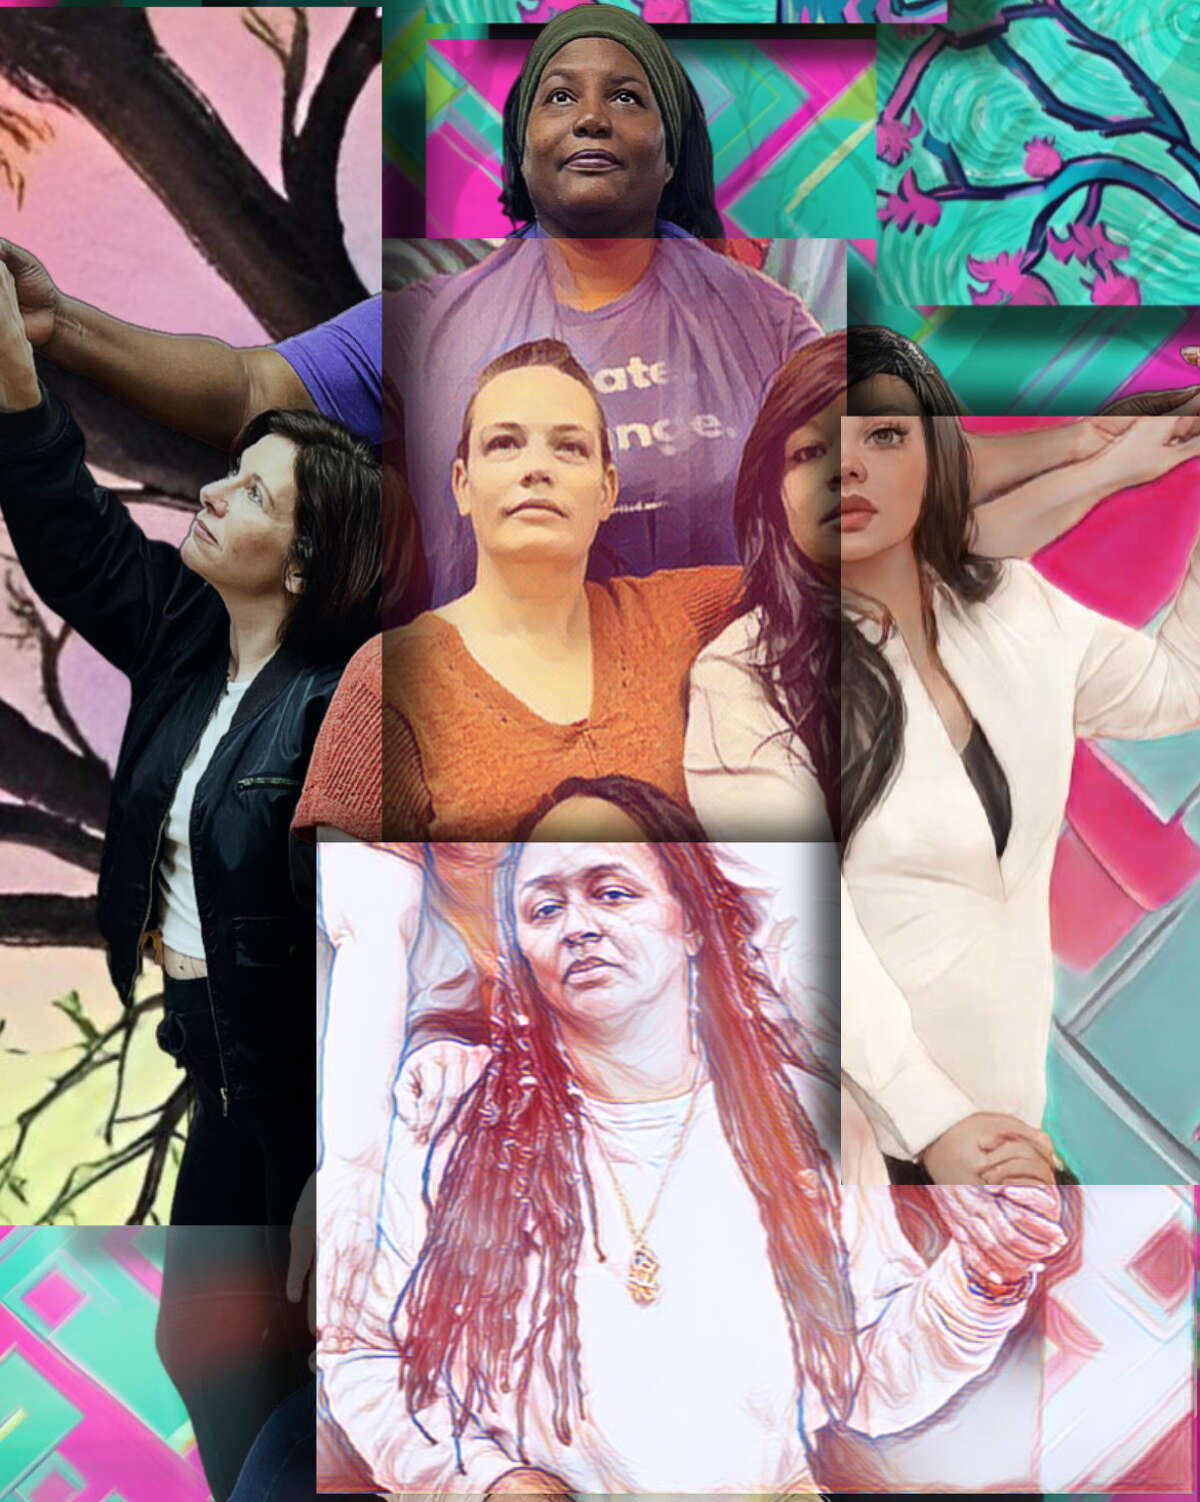 Promotional art for Creative Action Unlimited's "MA'Space" featuring the cast. Director Jae Gayle and the ensemble of five mothers devised the play, which examines motherhood, womanhood and their intersections with race, class and politics. (Courtesy of Creative Action Unlimited)